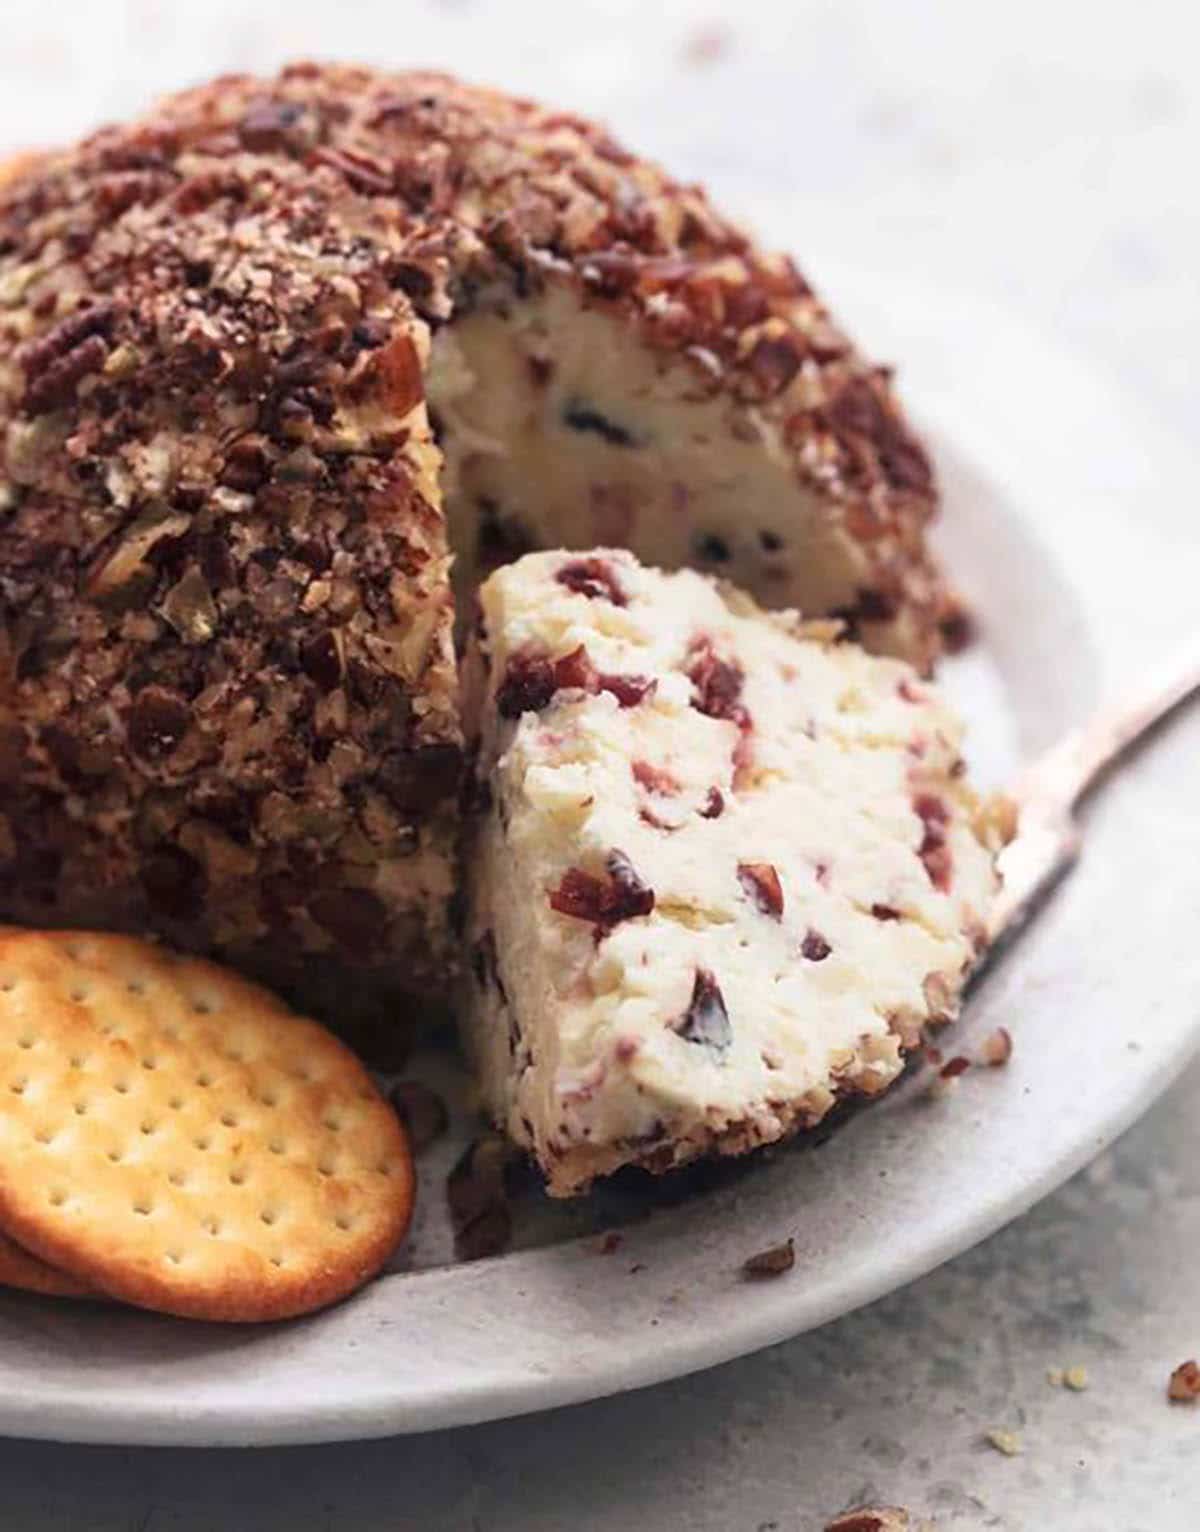 Cranberry pecan cheese ball served with crackers on the side